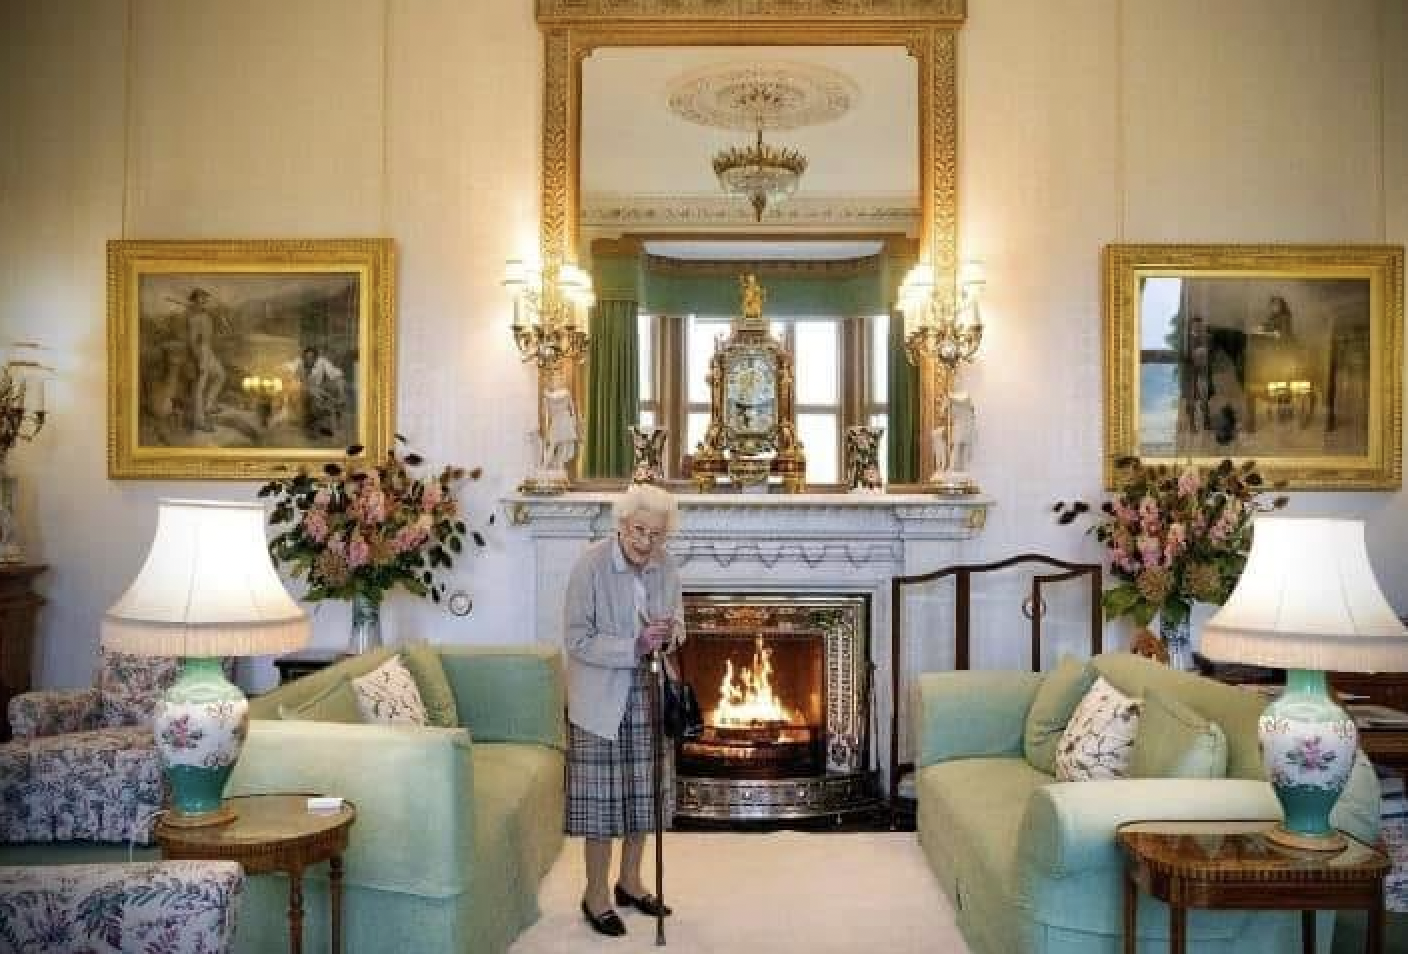 The last offical engagement of the Queen at Balmoral.